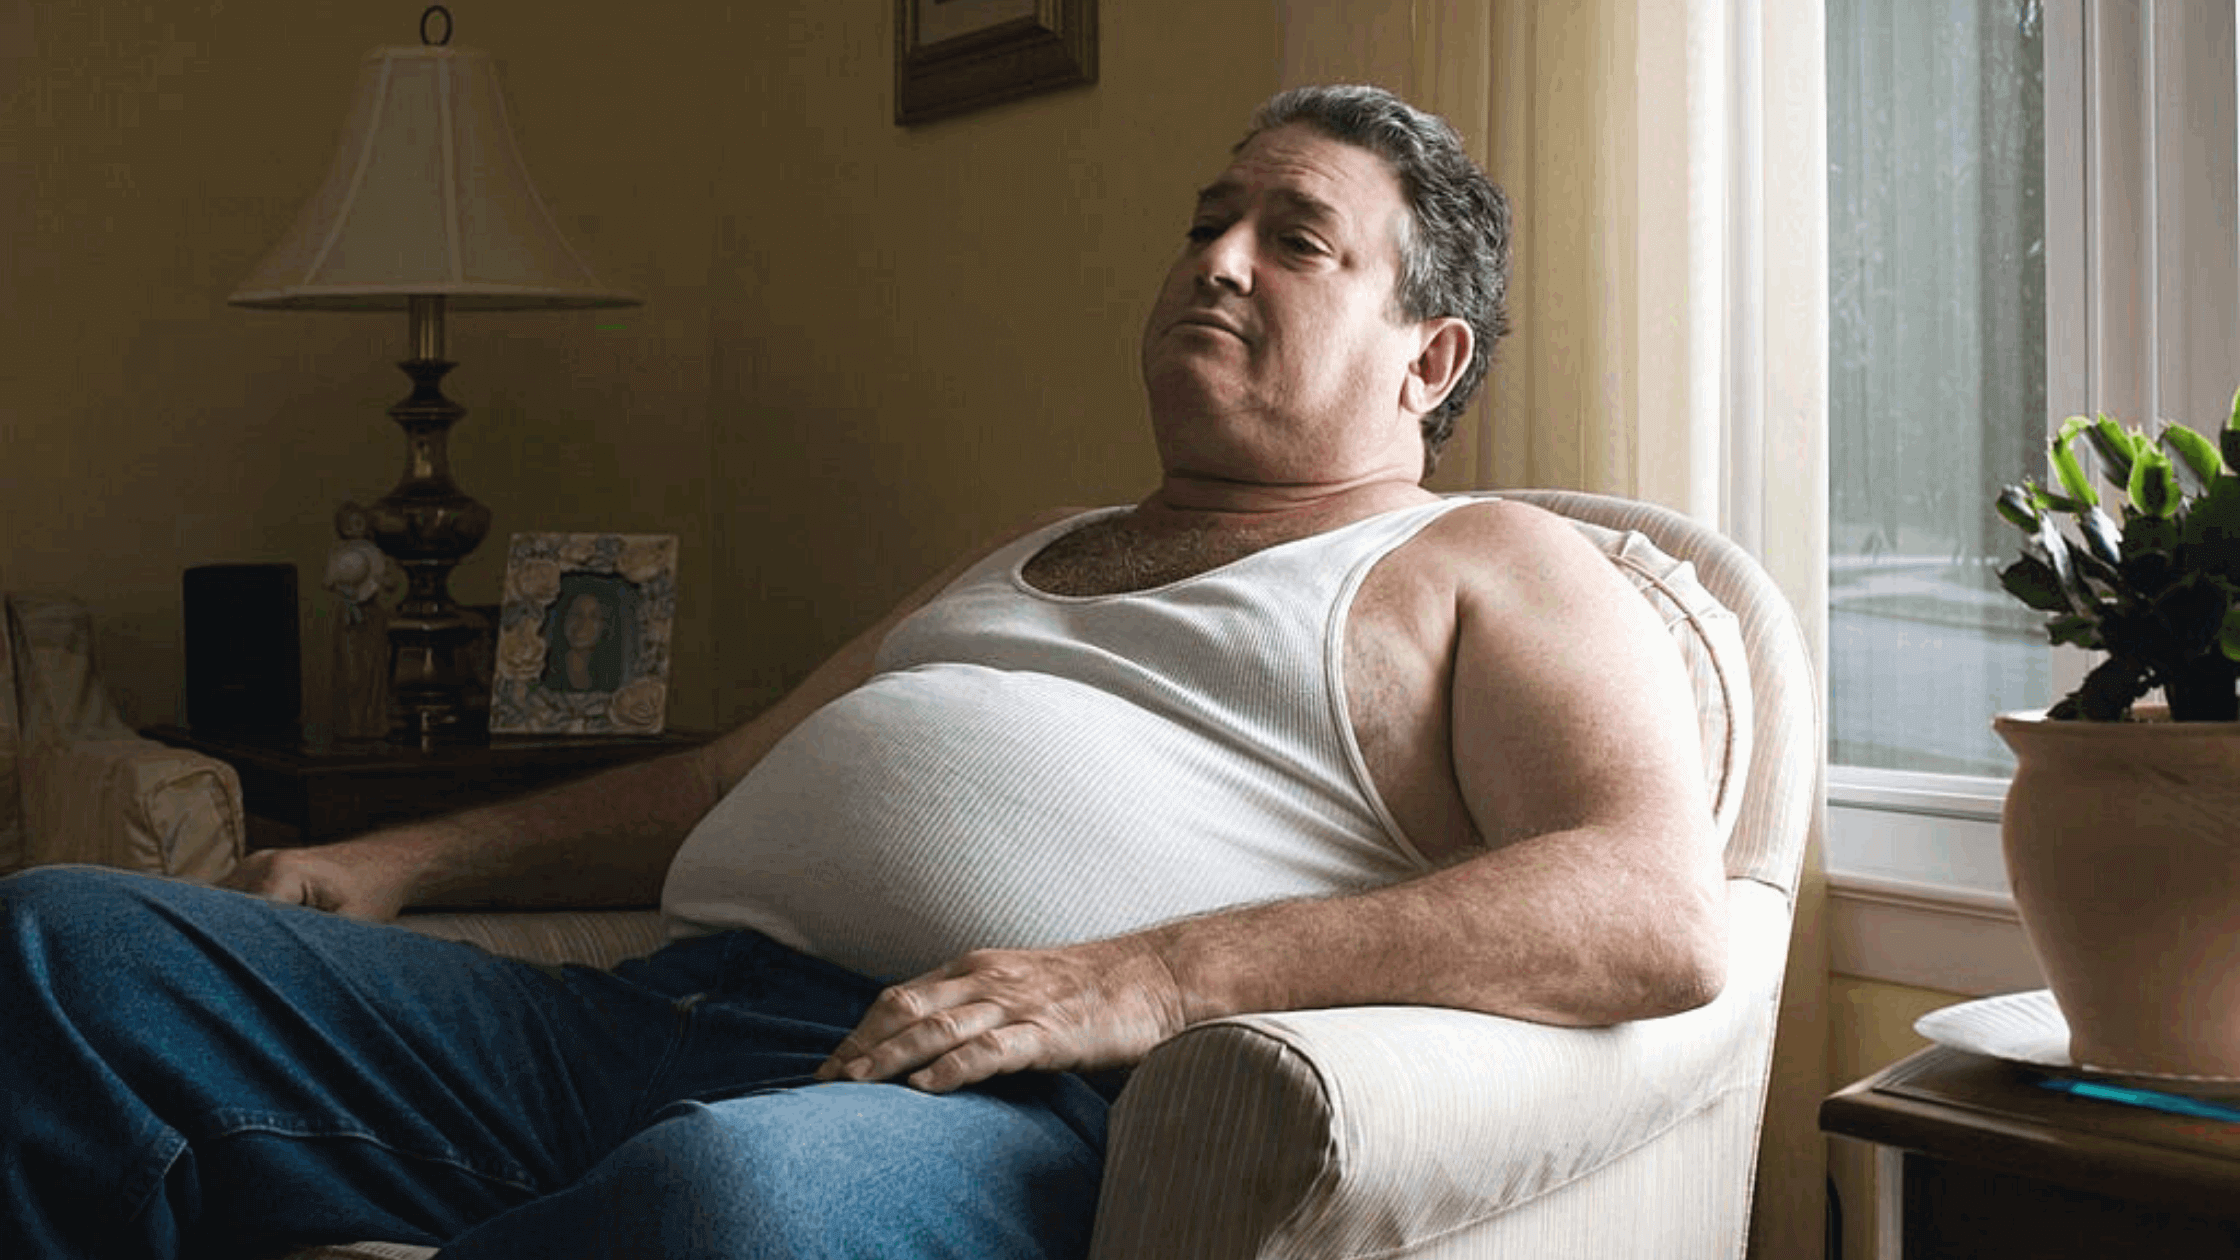 Infectious Diseases & Obesity During Pandemic Conditions